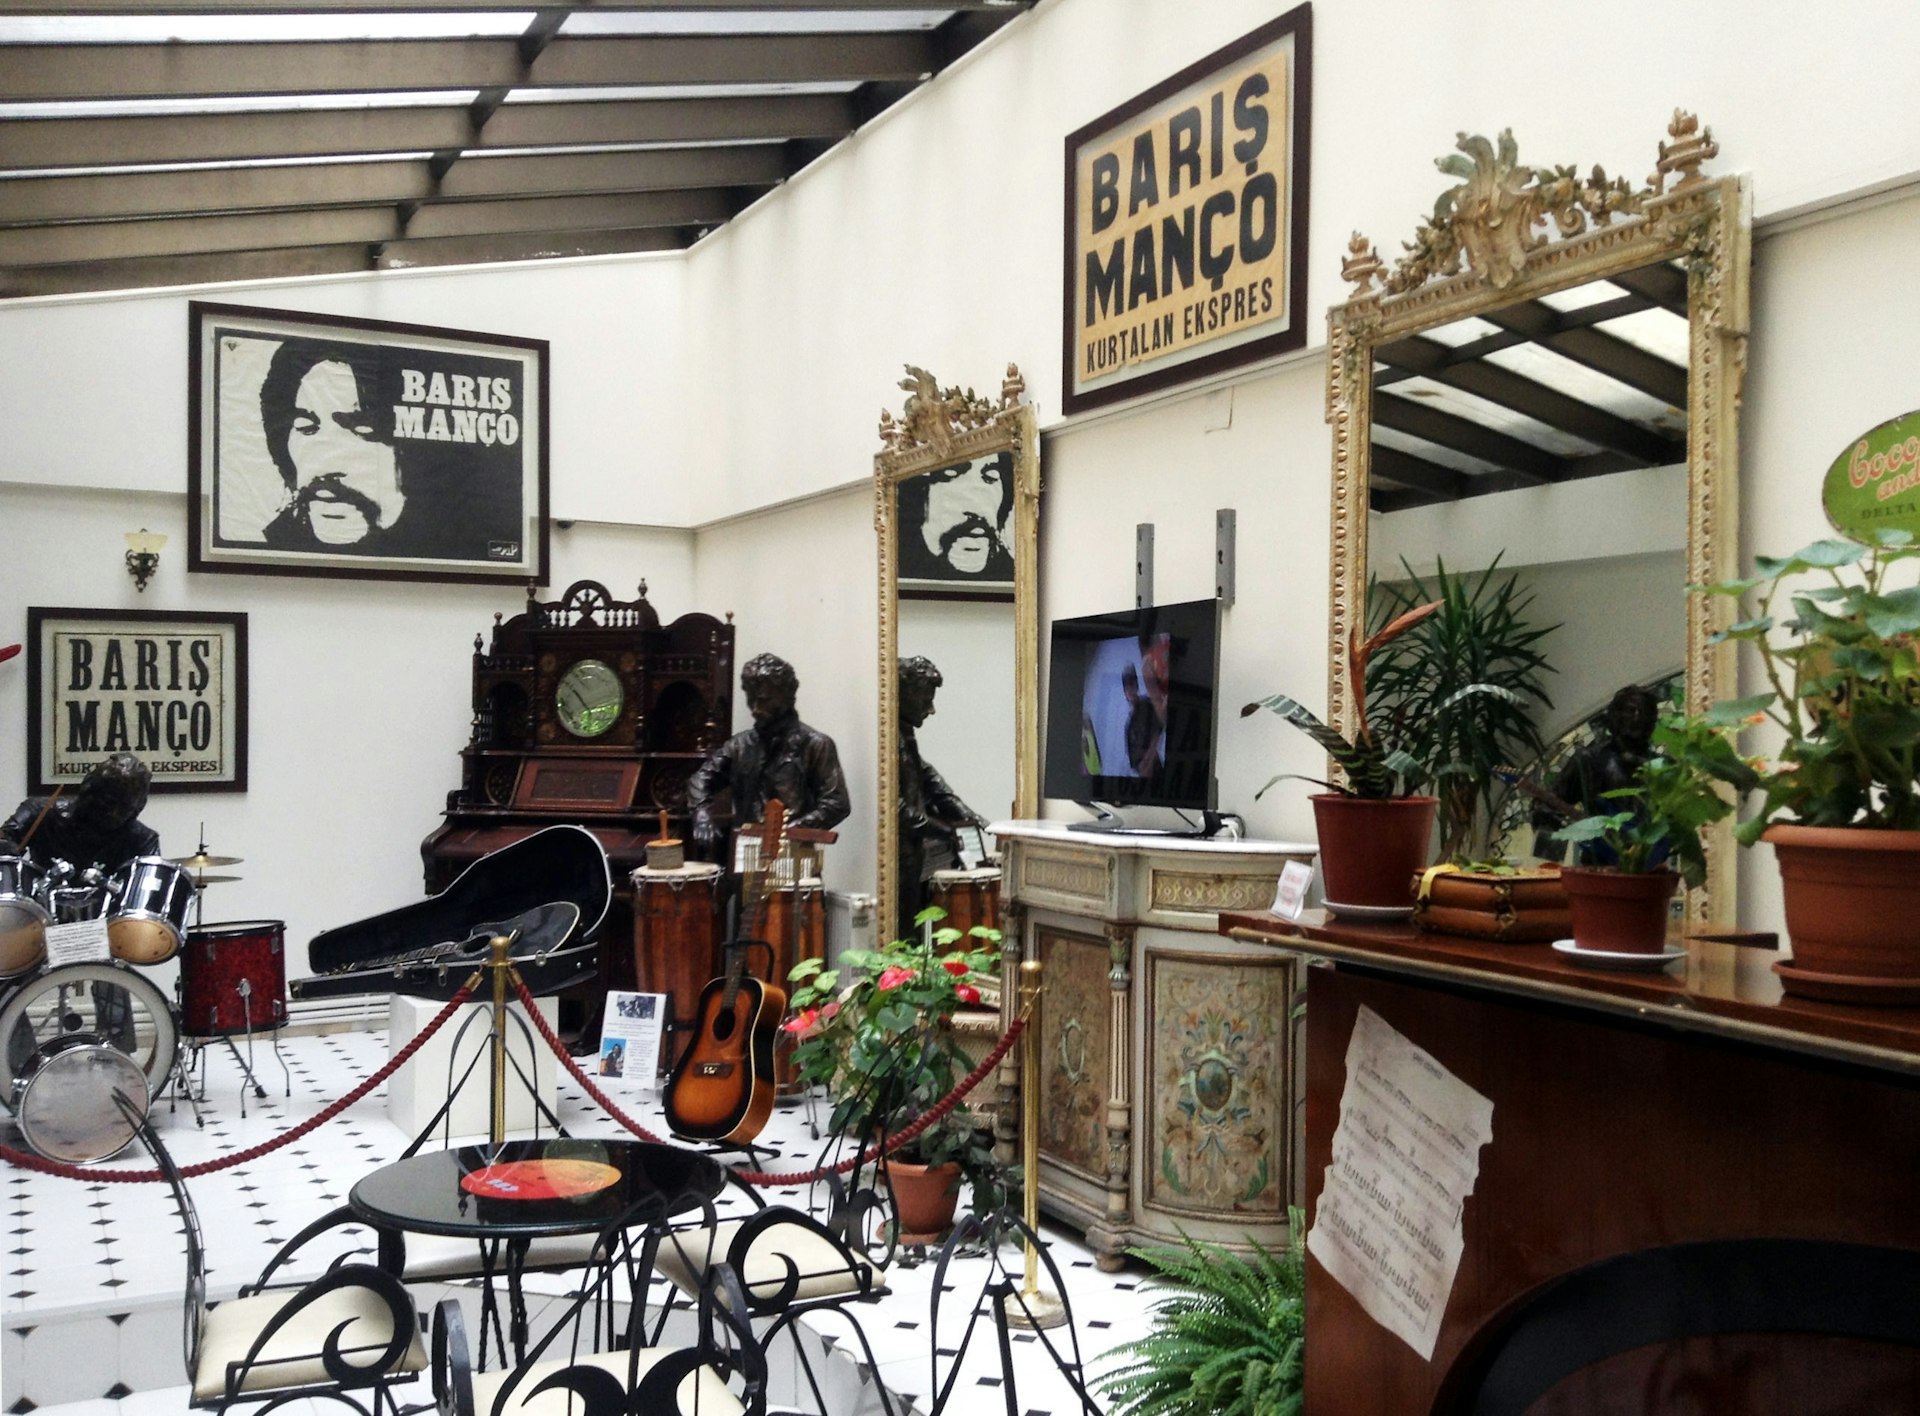 A room is laid out with instruments belonging to the Turkish rock star Barış Manço, and there are promotional posters hanging on the walls